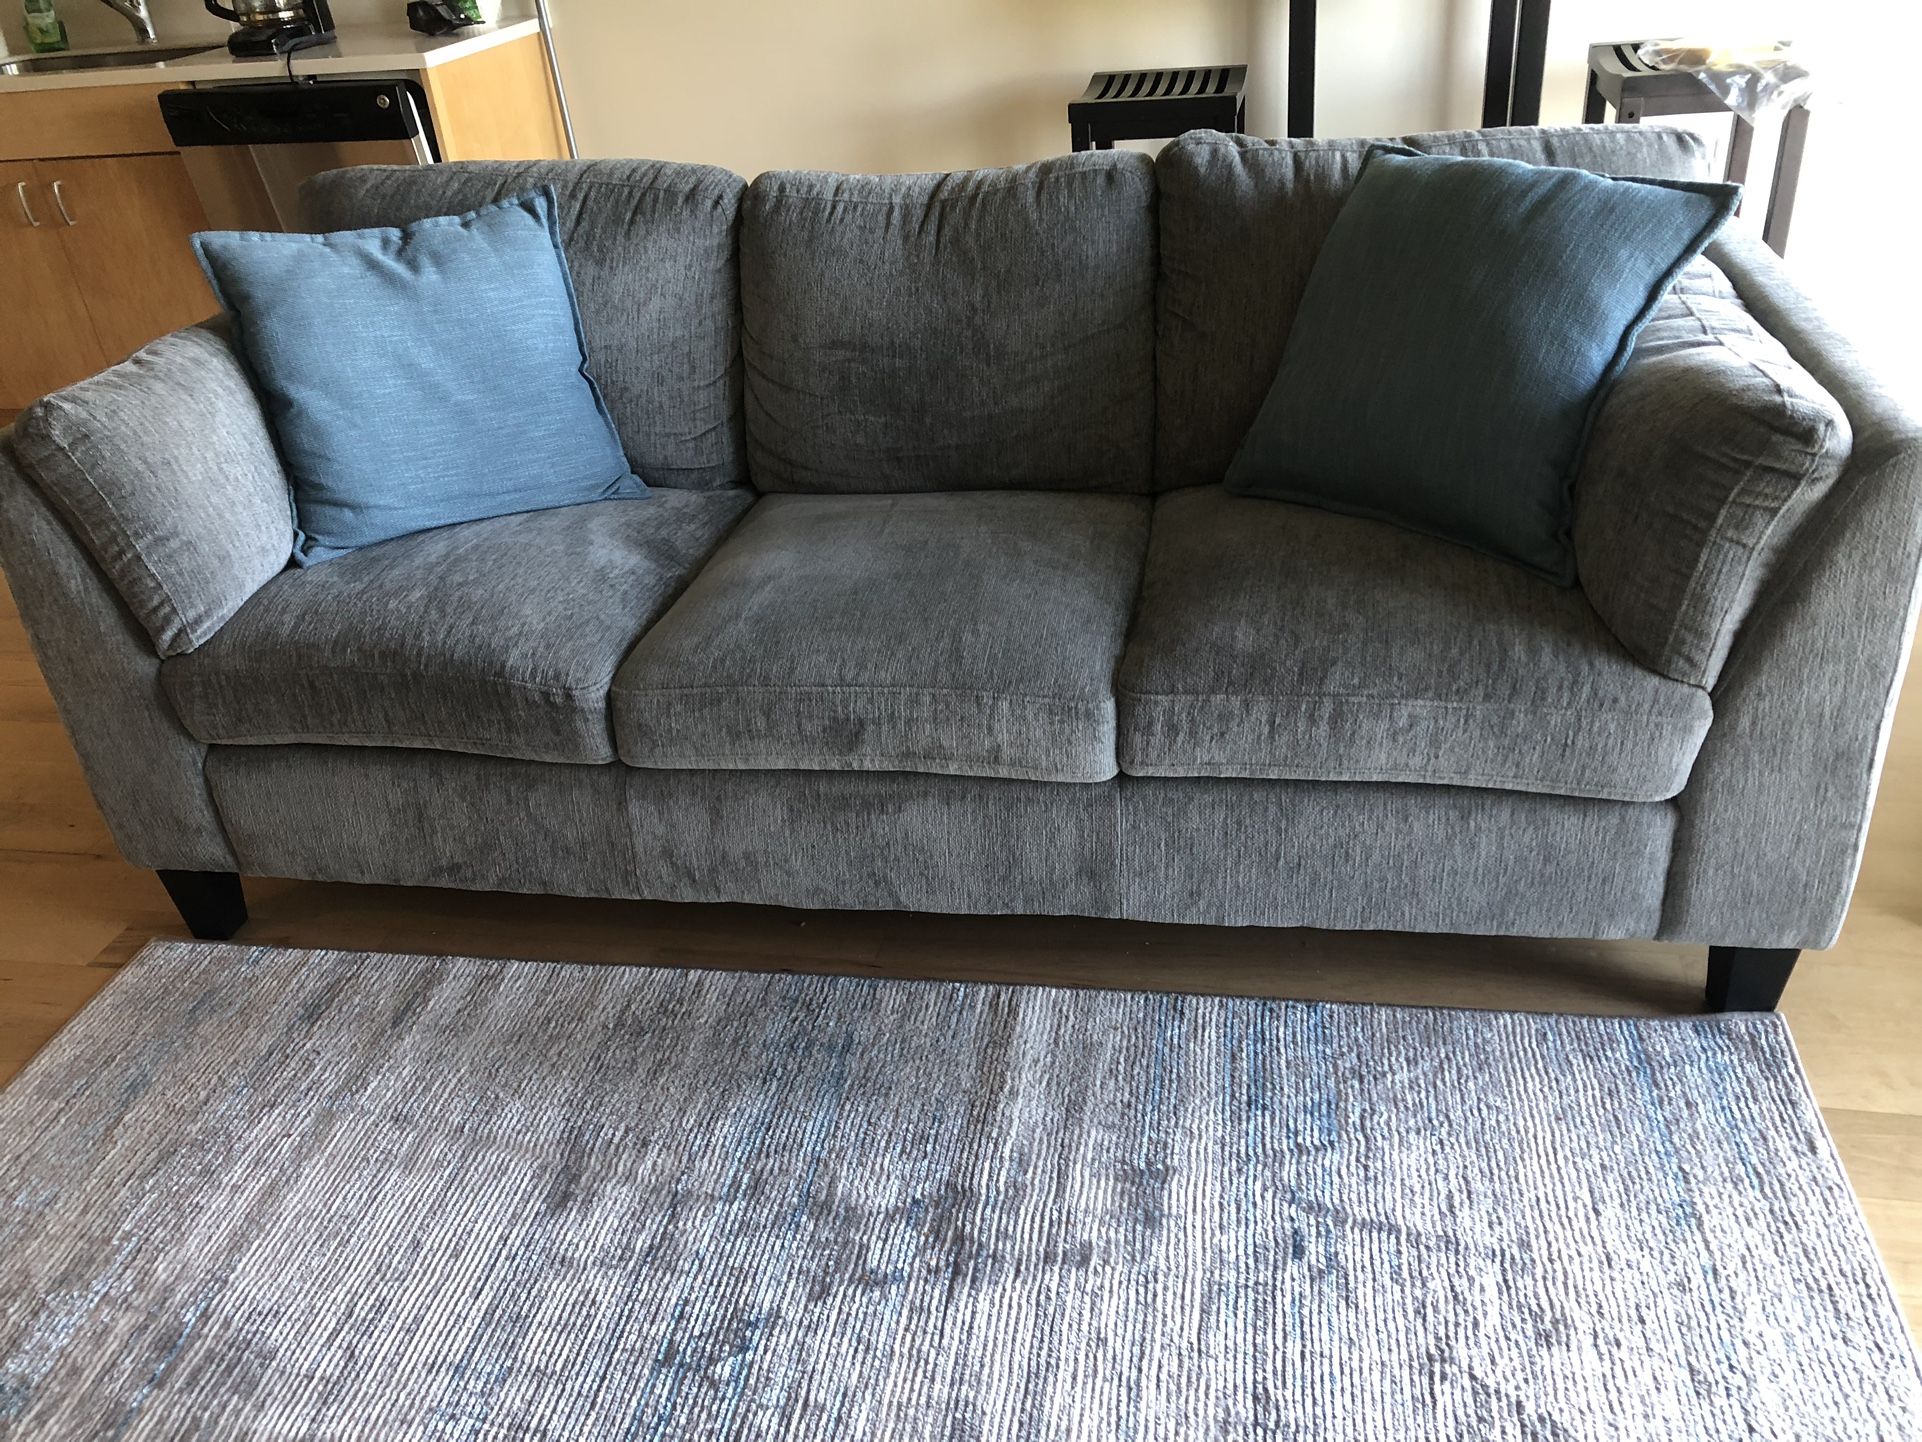 Great Condition Couch - Like New 